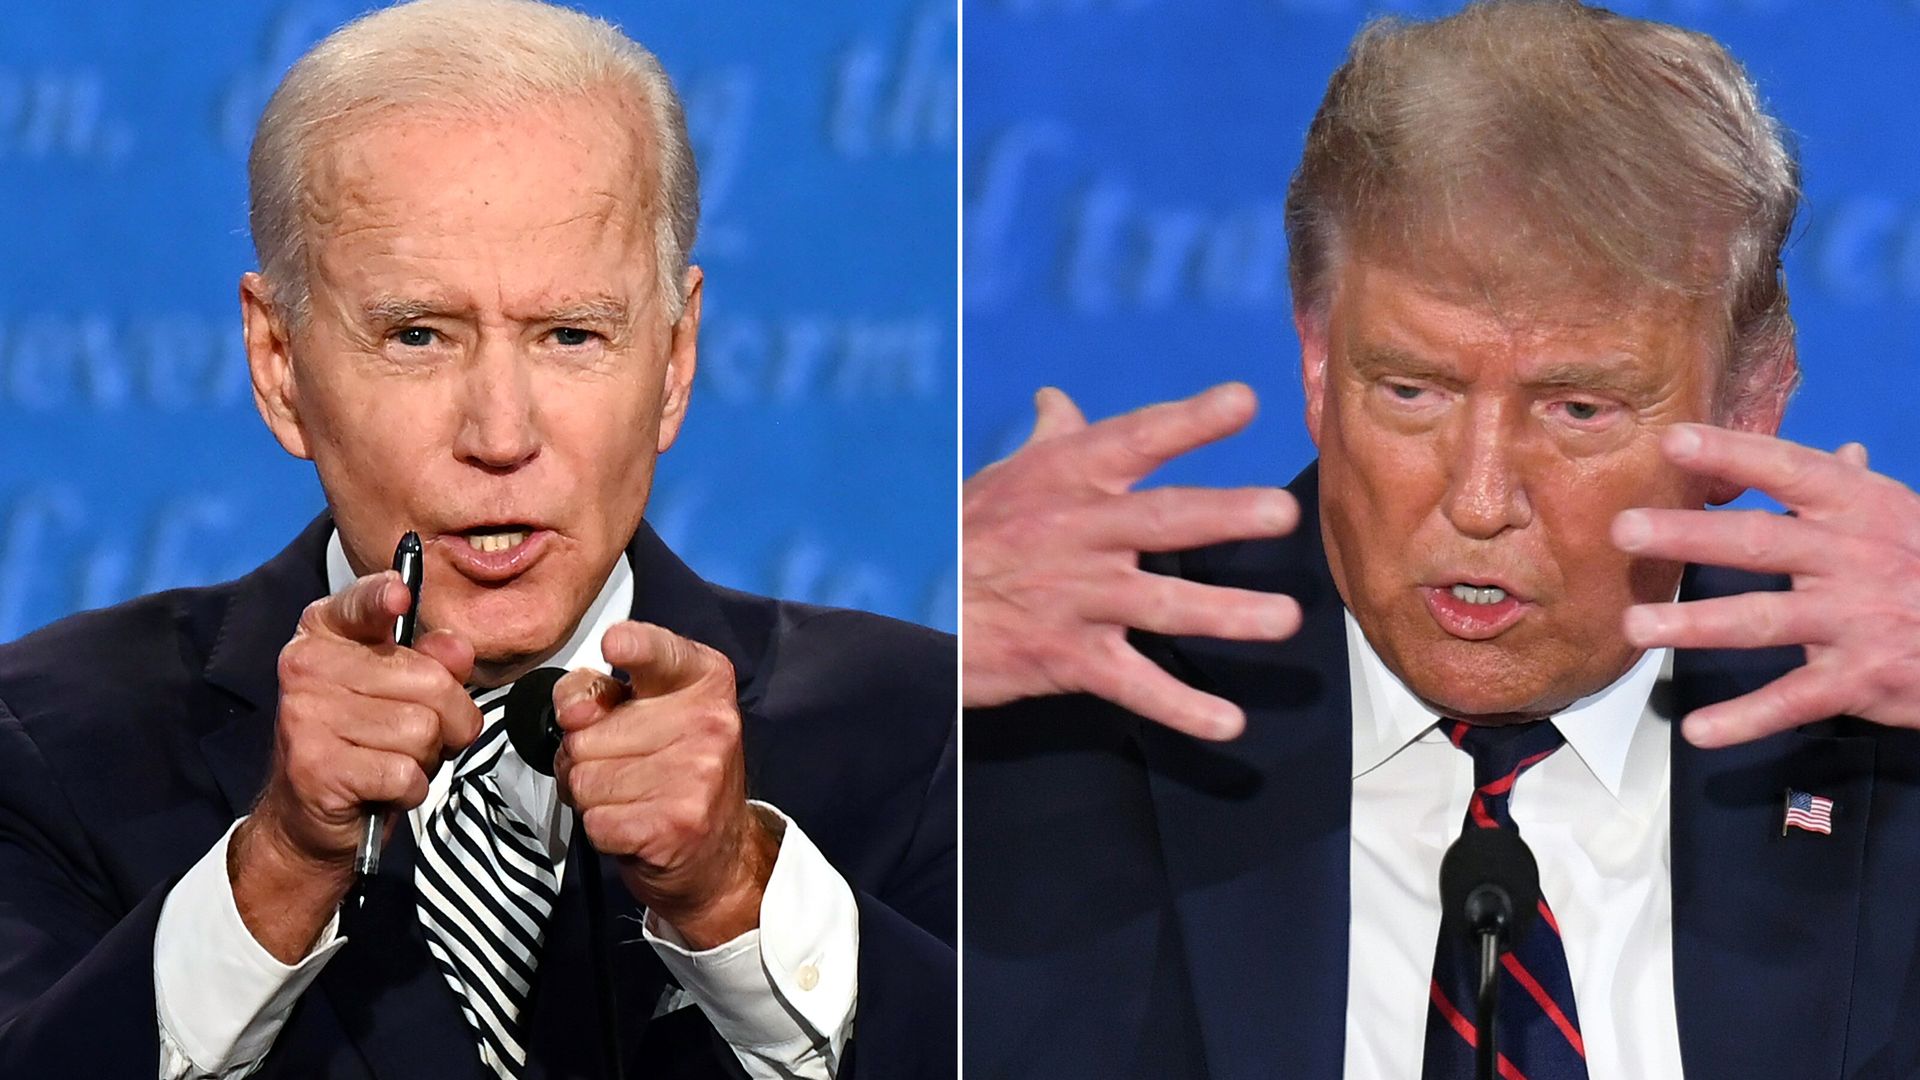 Joe Biden (left) and Donald Trump (right) gesture during the first debate